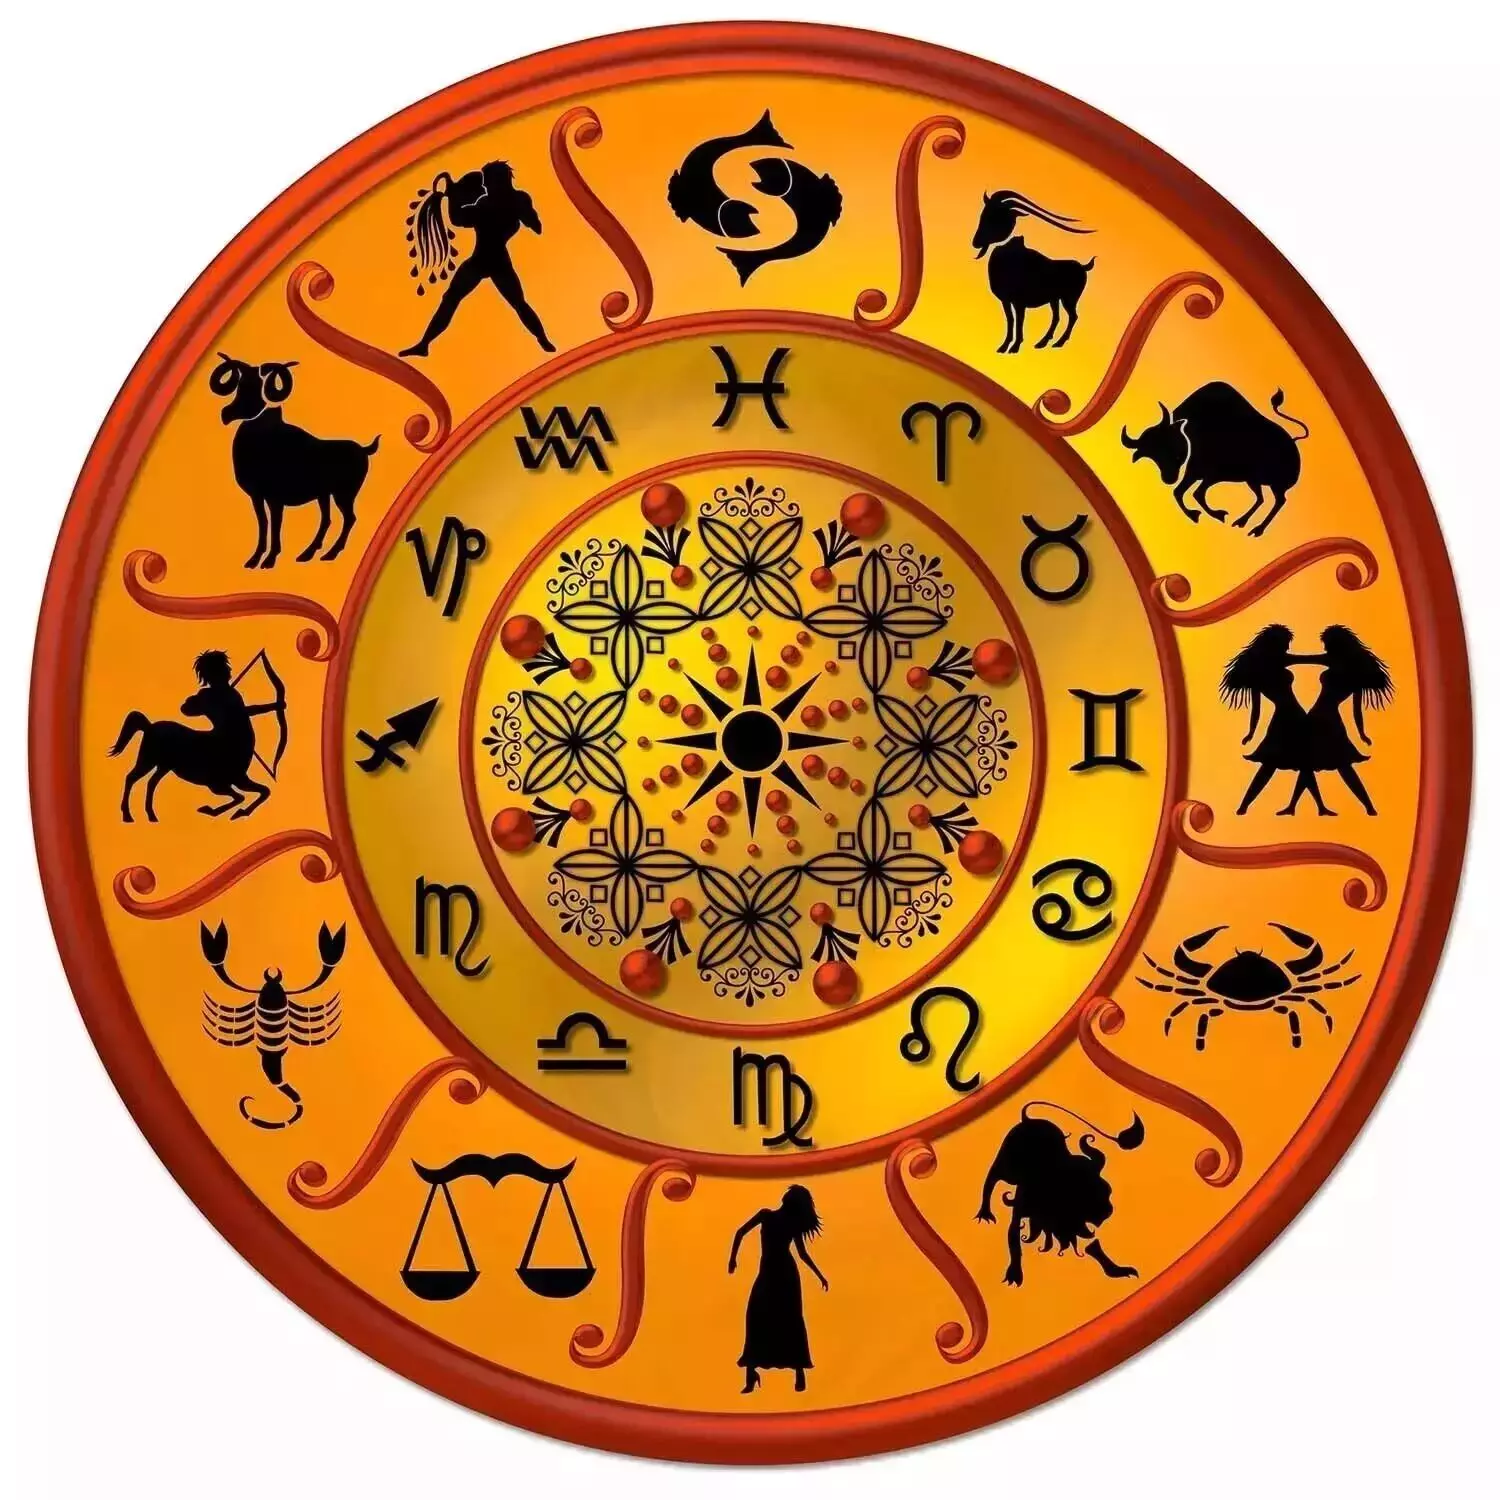 04 December – Know your todays horoscope